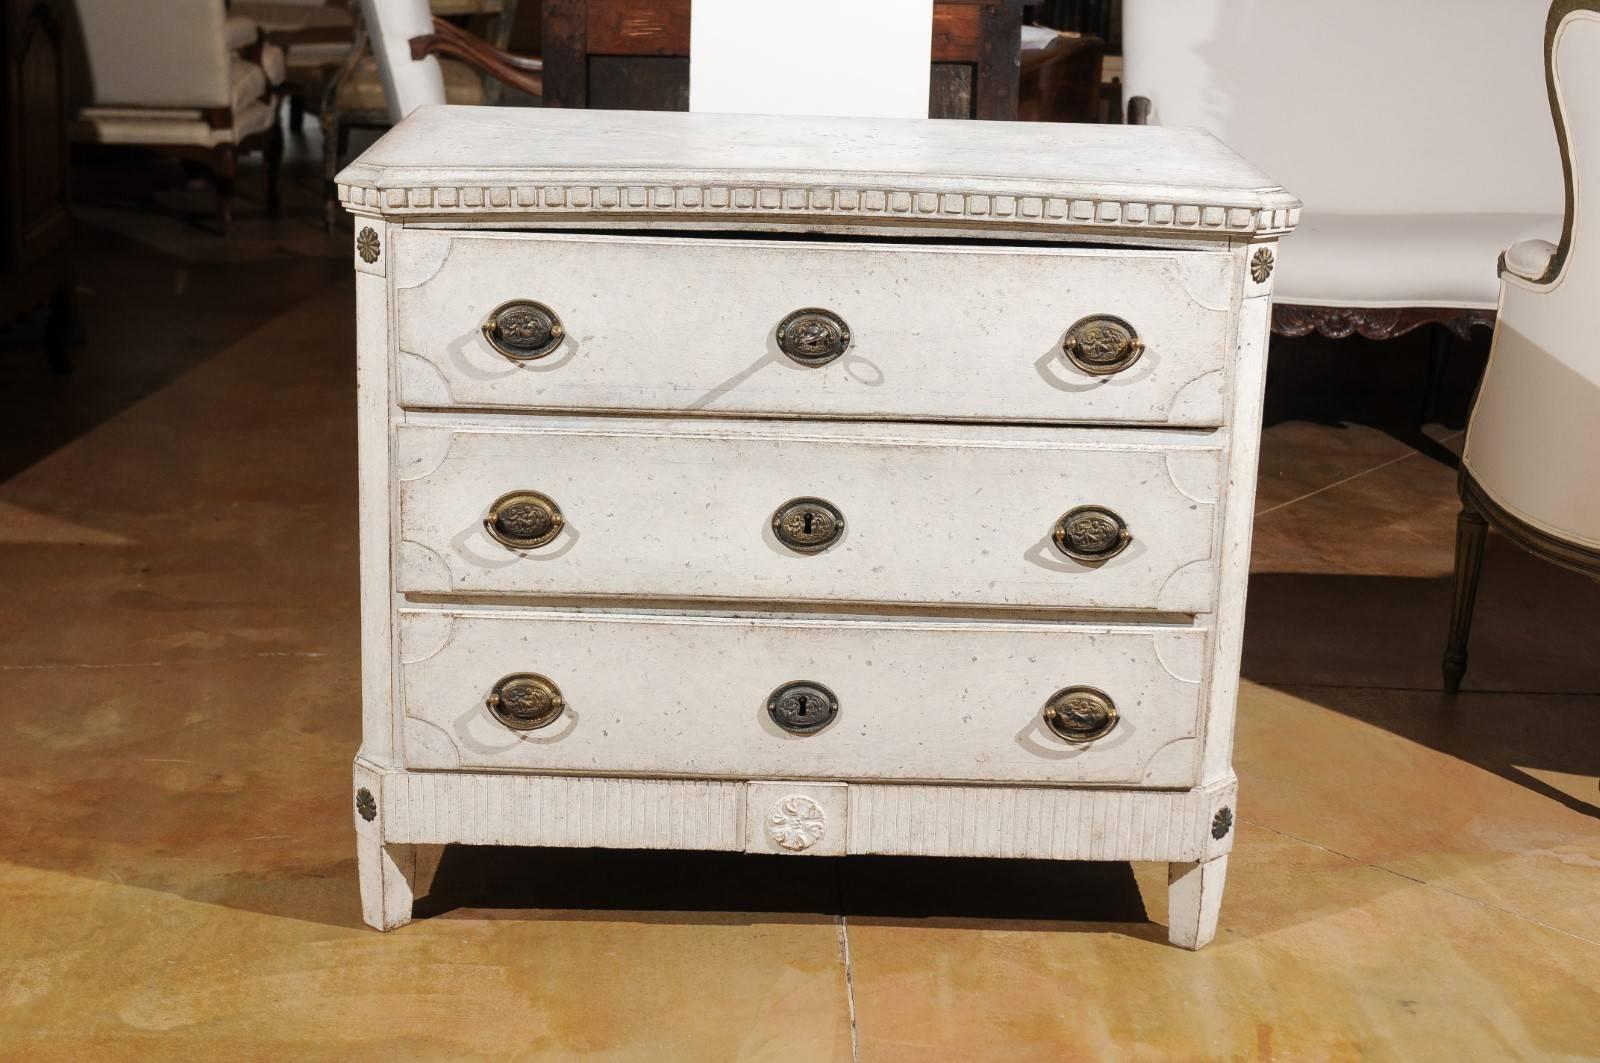 A Swedish period Gustavian painted three-drawer commode from the early 19th century, with dentil molding and rosettes. This Swedish Gustavian chest features a rectangular planked top with canted corners in the front, sitting above a delicate dentil